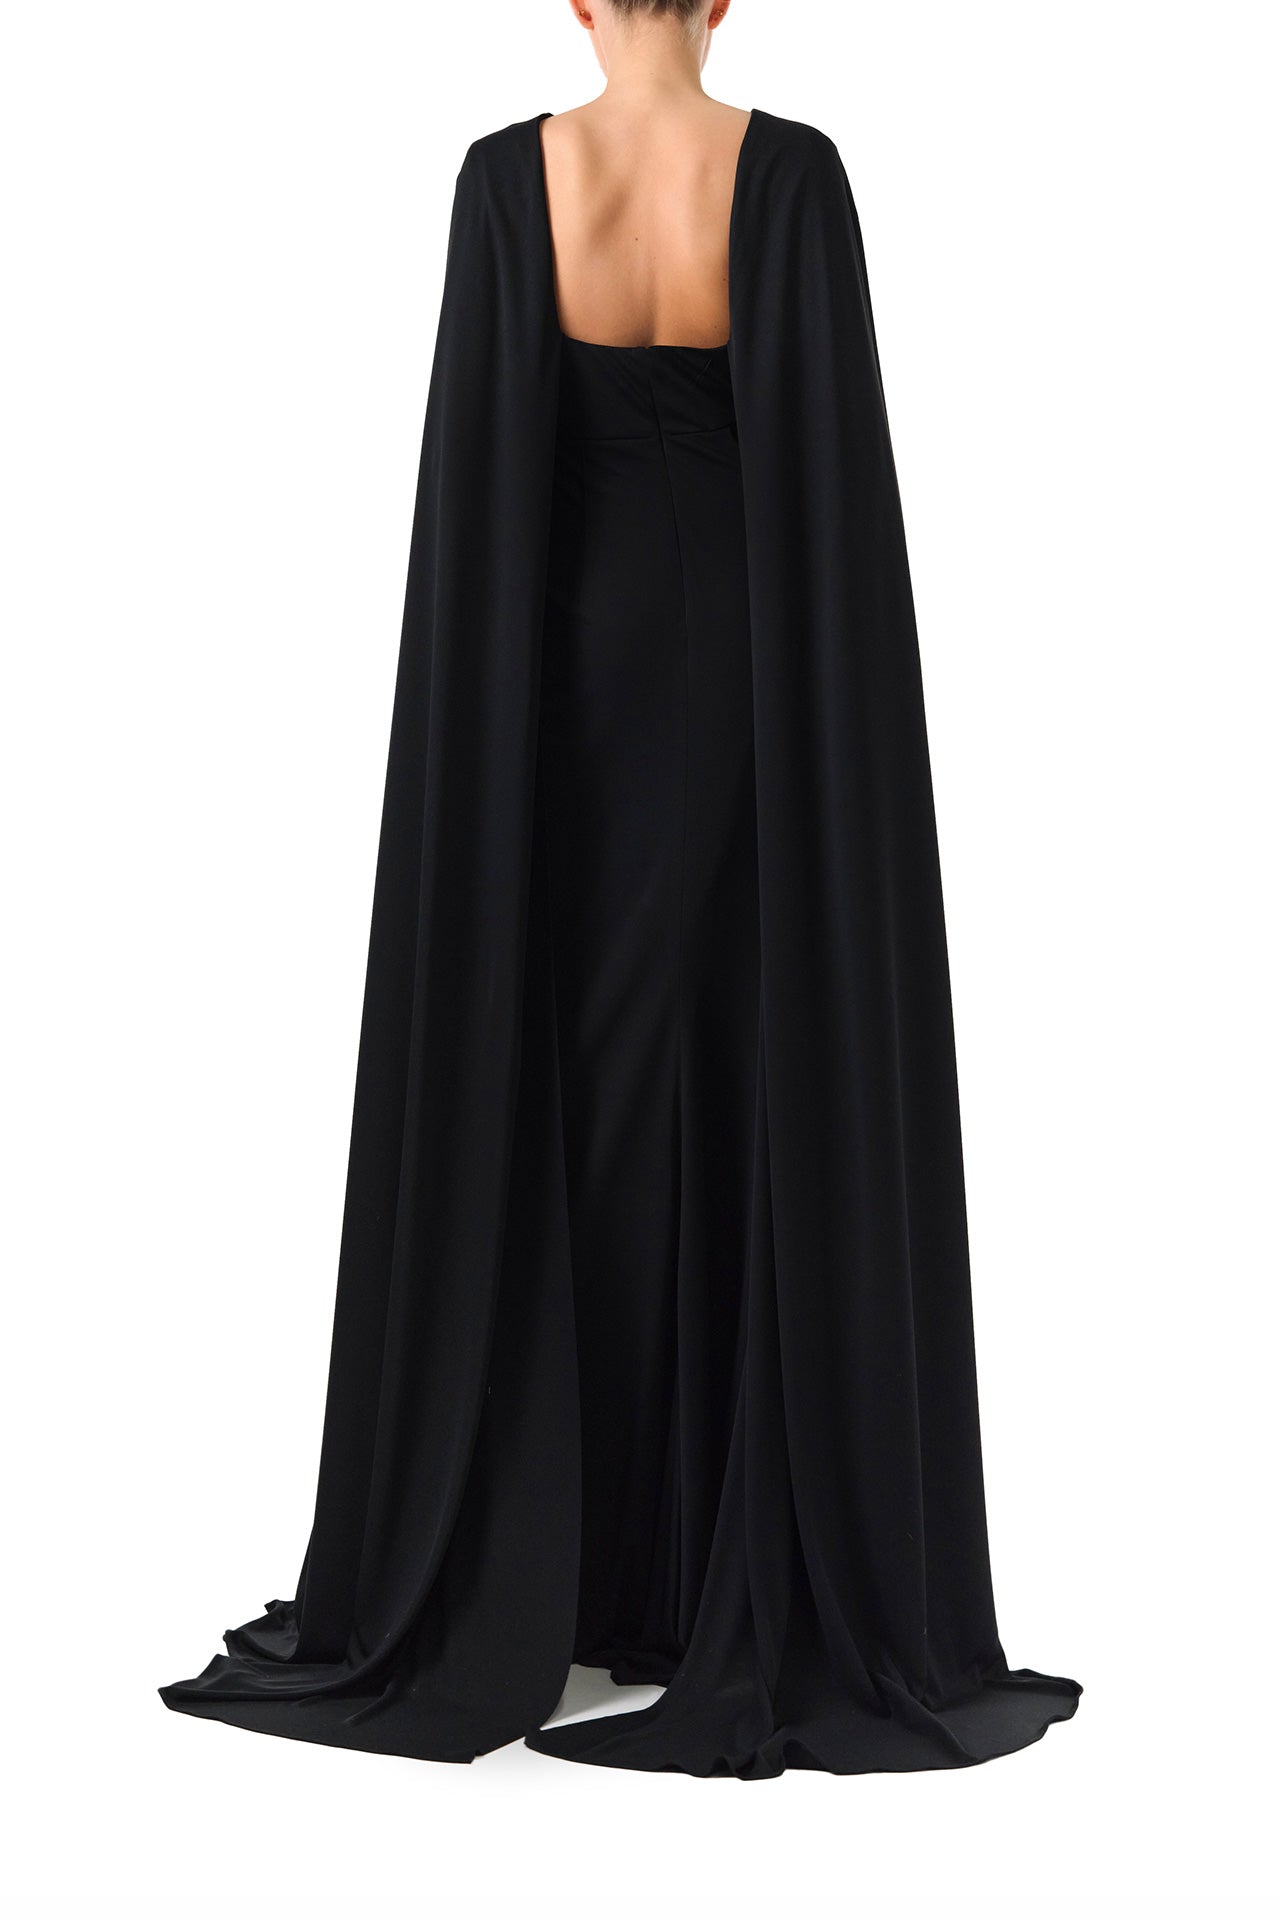 Monique Lhuillier Spring 2024 black crepe-back satin gown with attached cape and keyhole bodice - back.